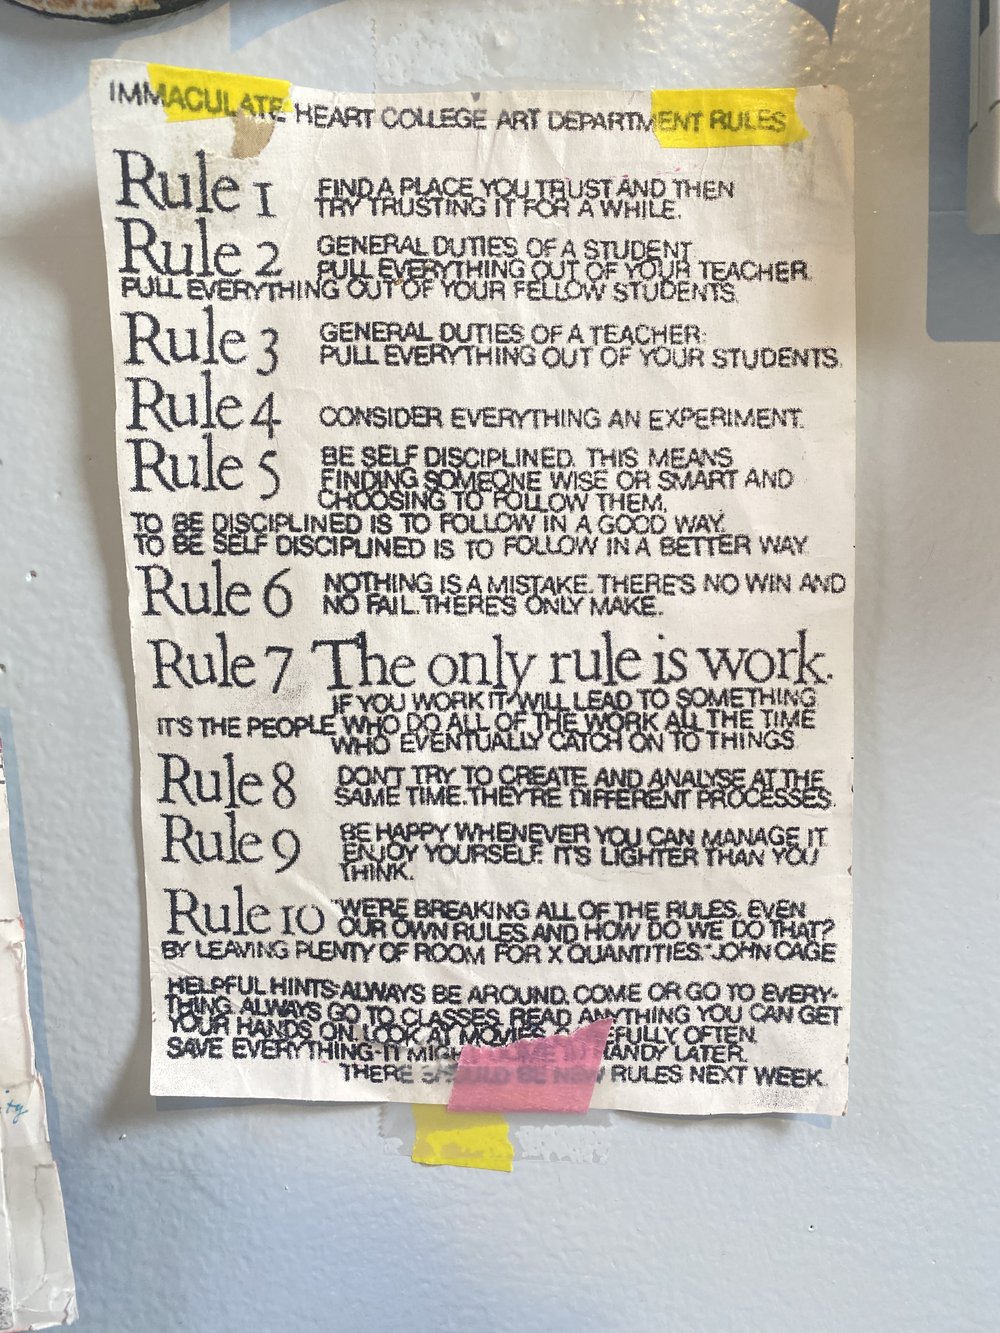 Maya’s “Immaculate Heart College Art Department Rules” from Sister Corita Kent